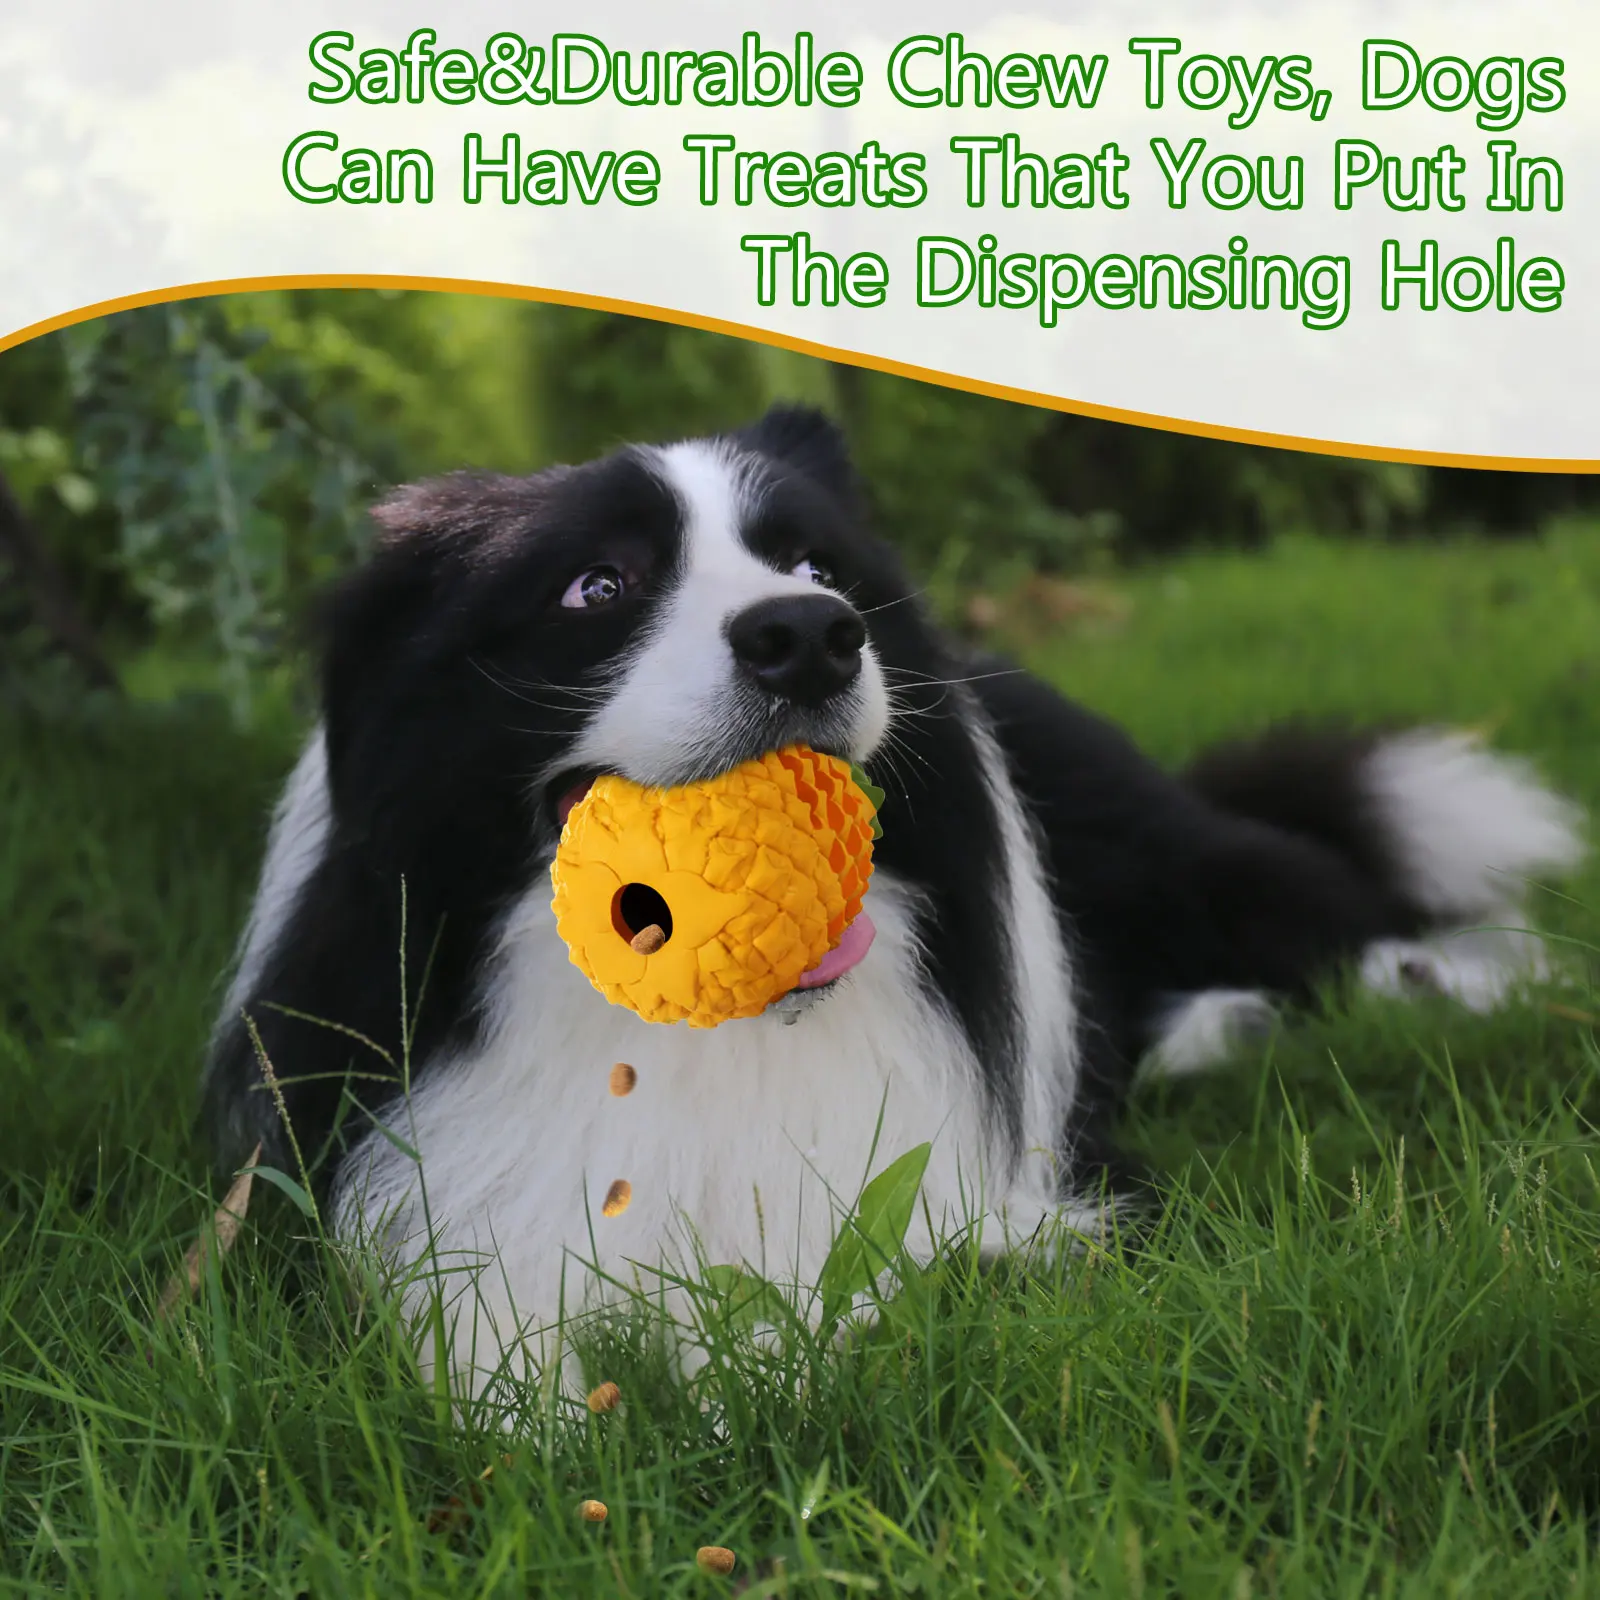 https://ae01.alicdn.com/kf/H7b03a8ee06734c468b782d37d60f8bbfd/Dog-Chew-Toys-for-Aggressive-Chewer-Tough-Dog-Dental-Chews-Toy-Indestructible-DogToys-for-Large-Dogs.jpg